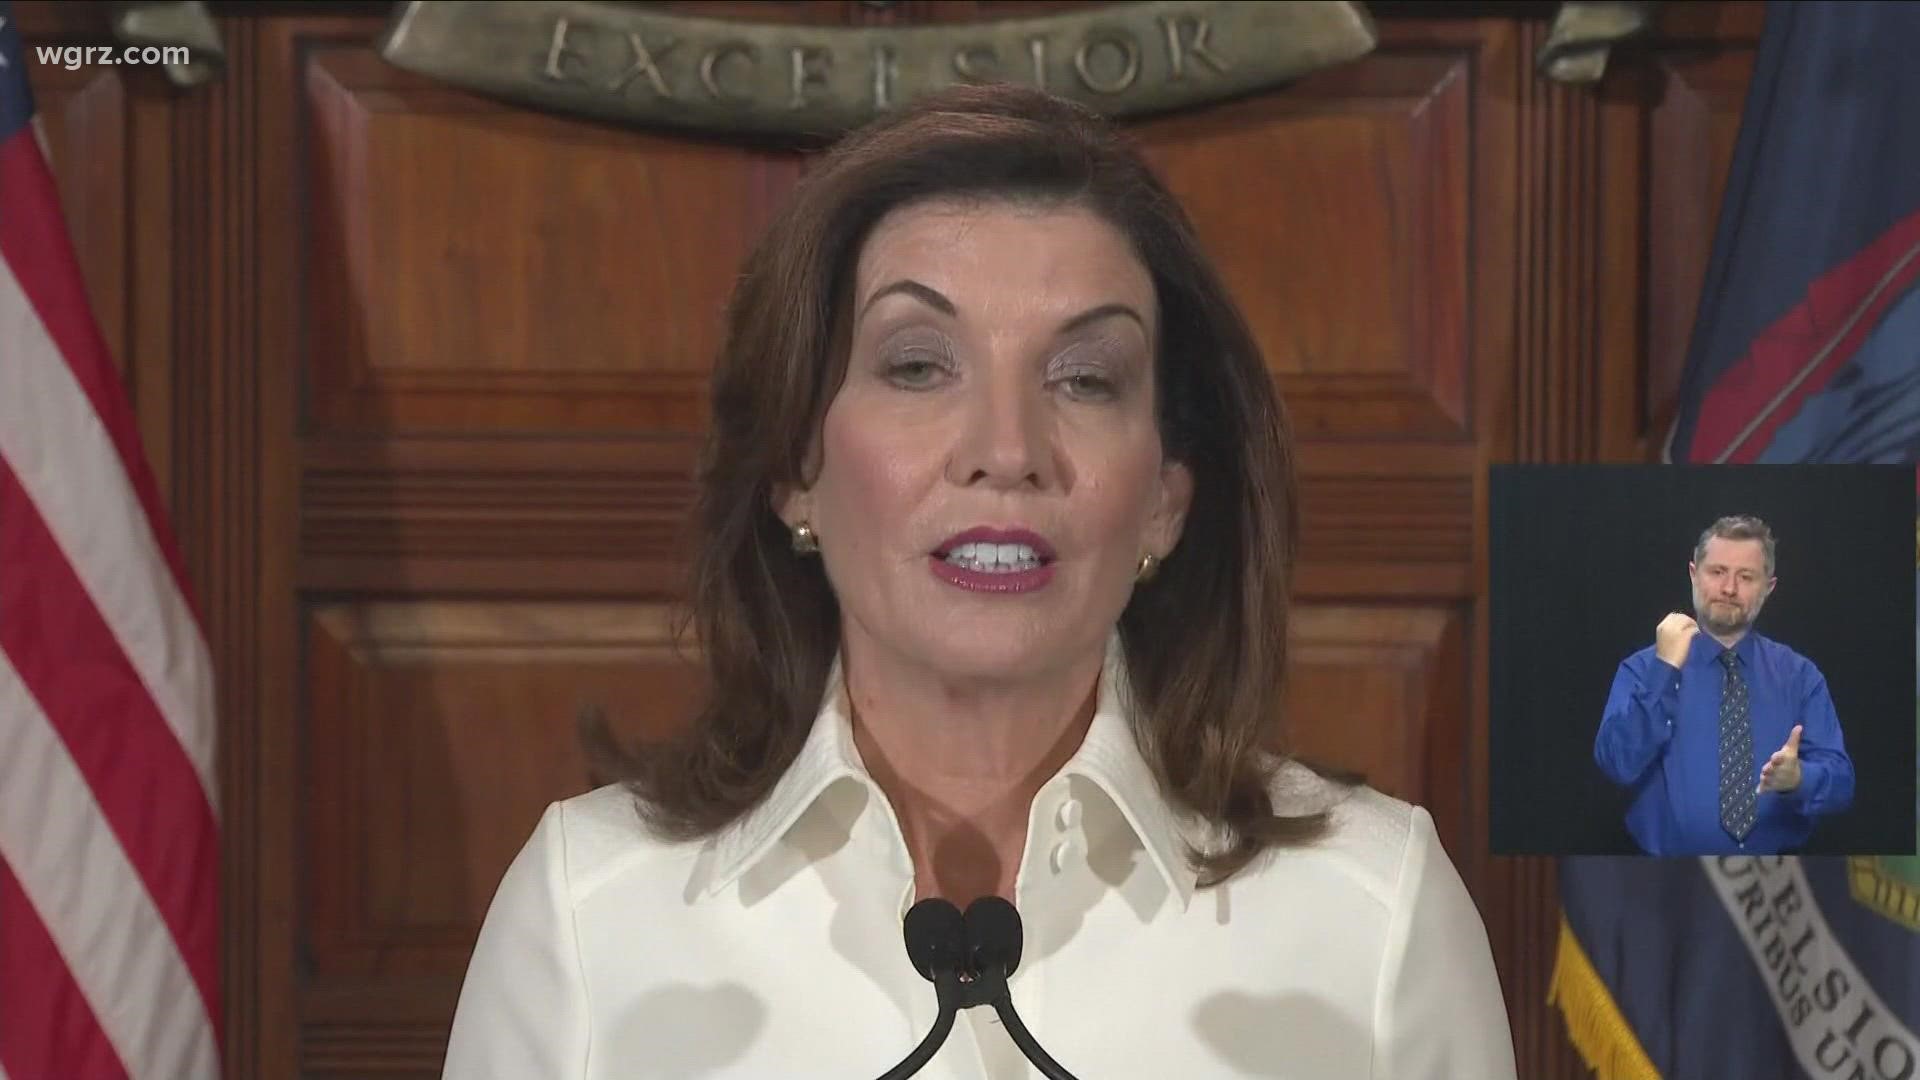 During her first address as Governor, Kathy Hochul spoke about her journey to the highest office in the state and about her family that she said made her who she is.